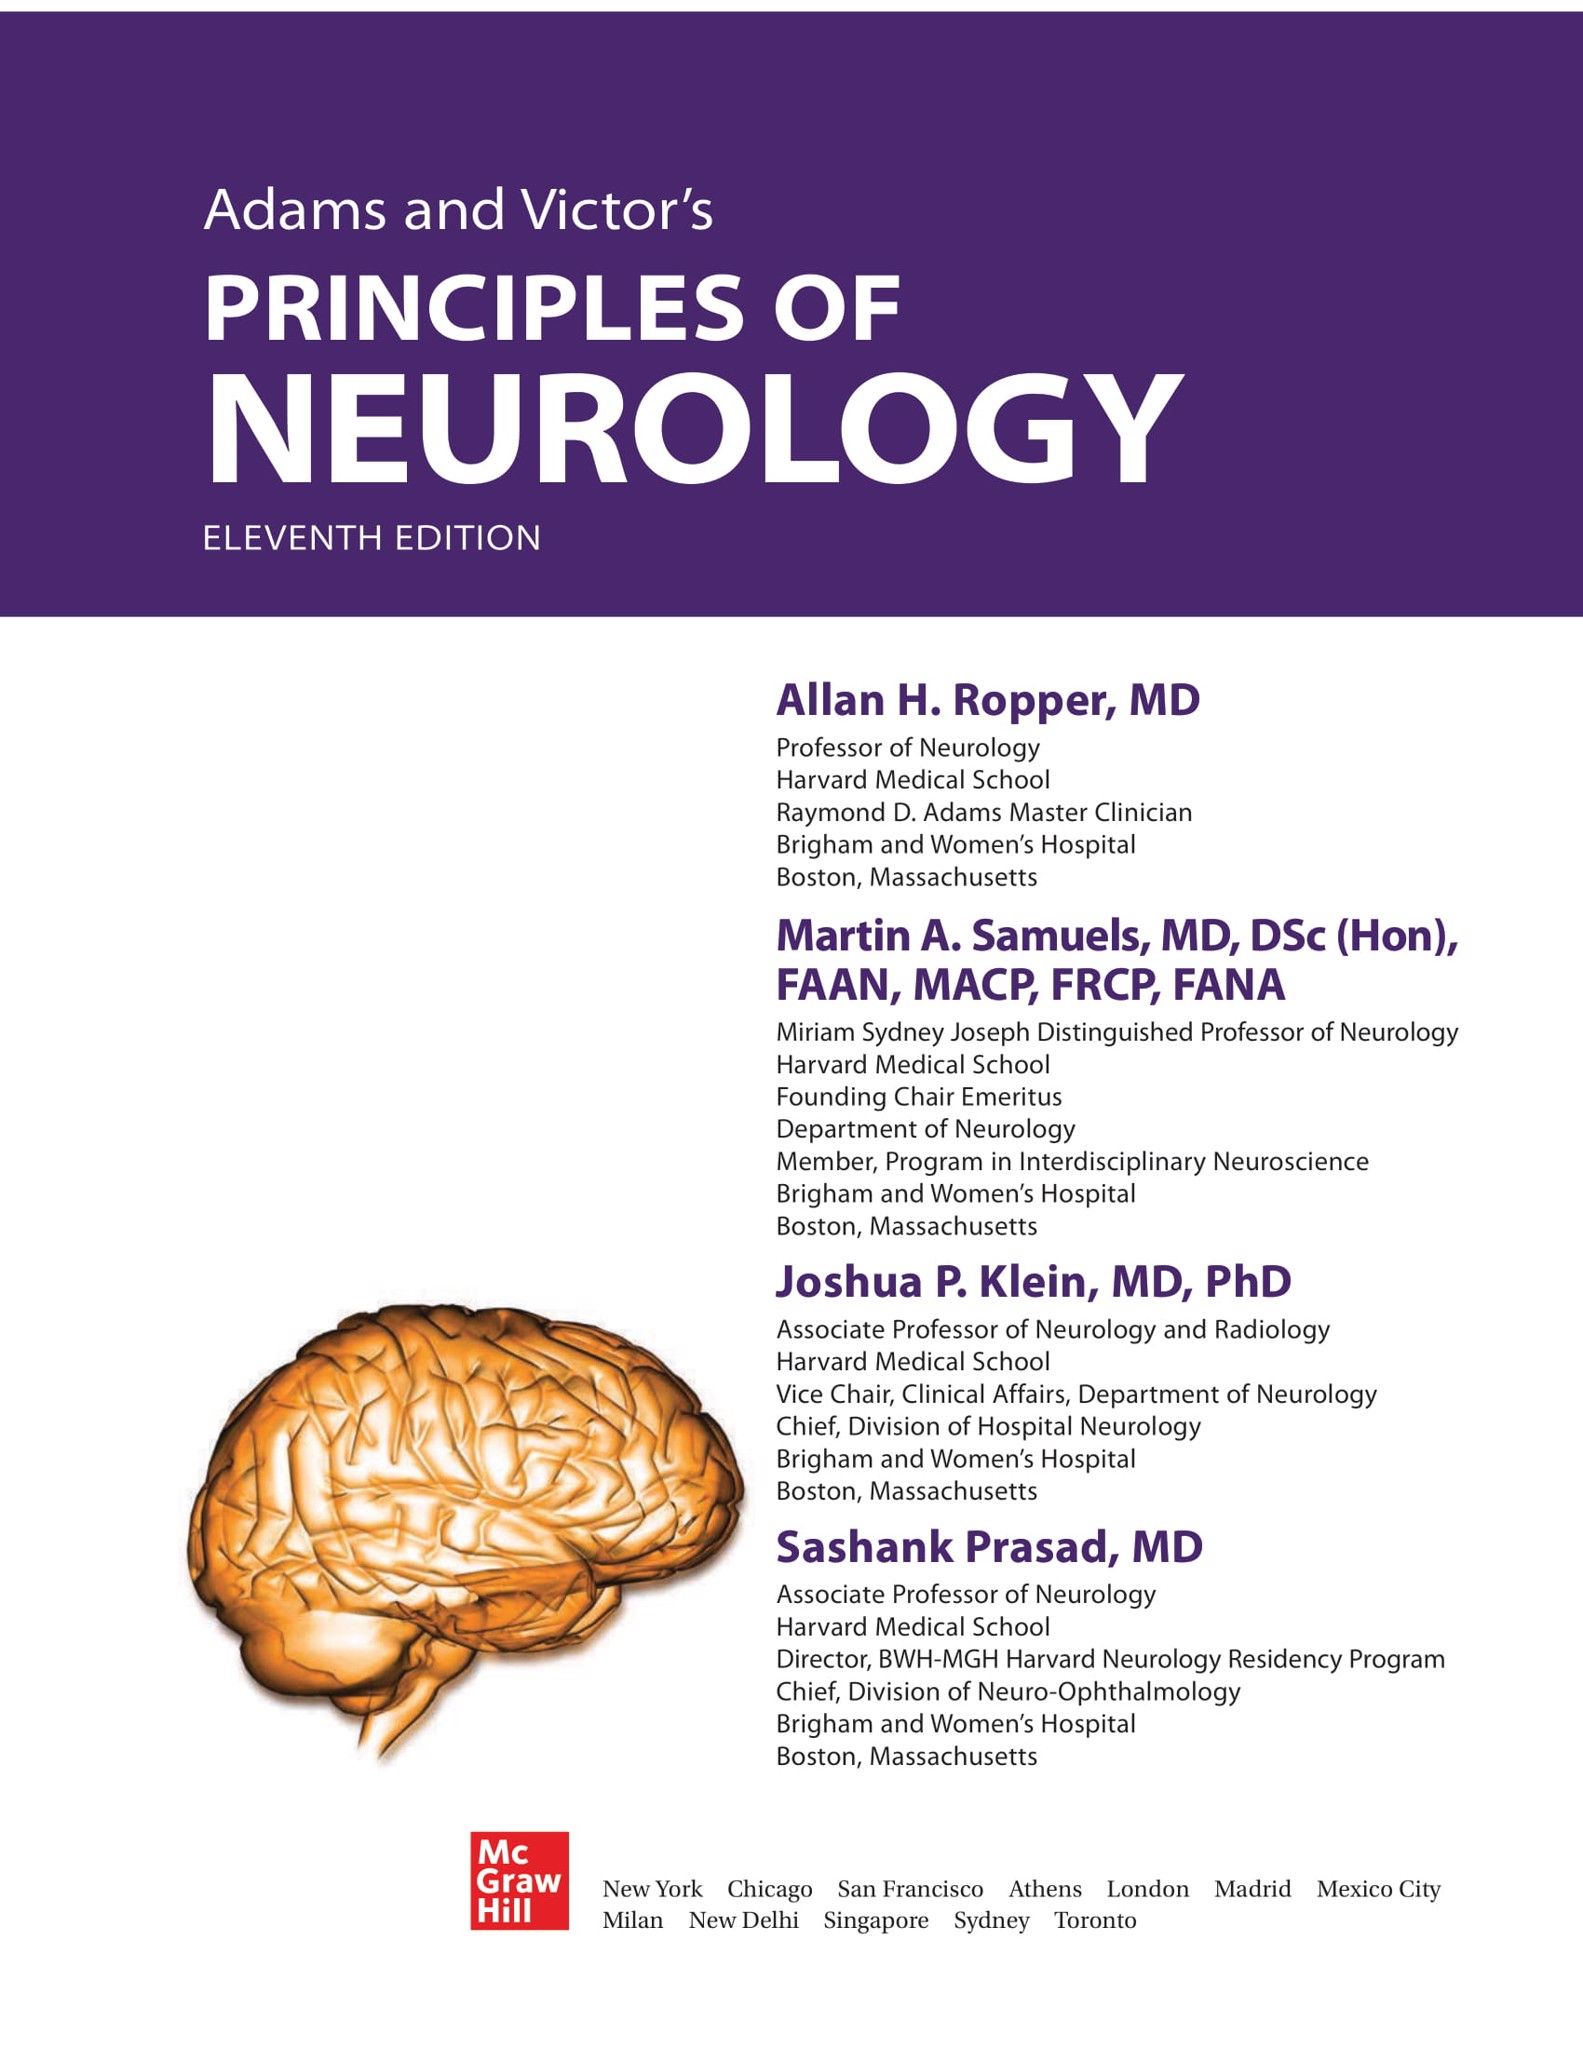 Adams and Victor's Principles of Neurology 11th Edition – E-books 